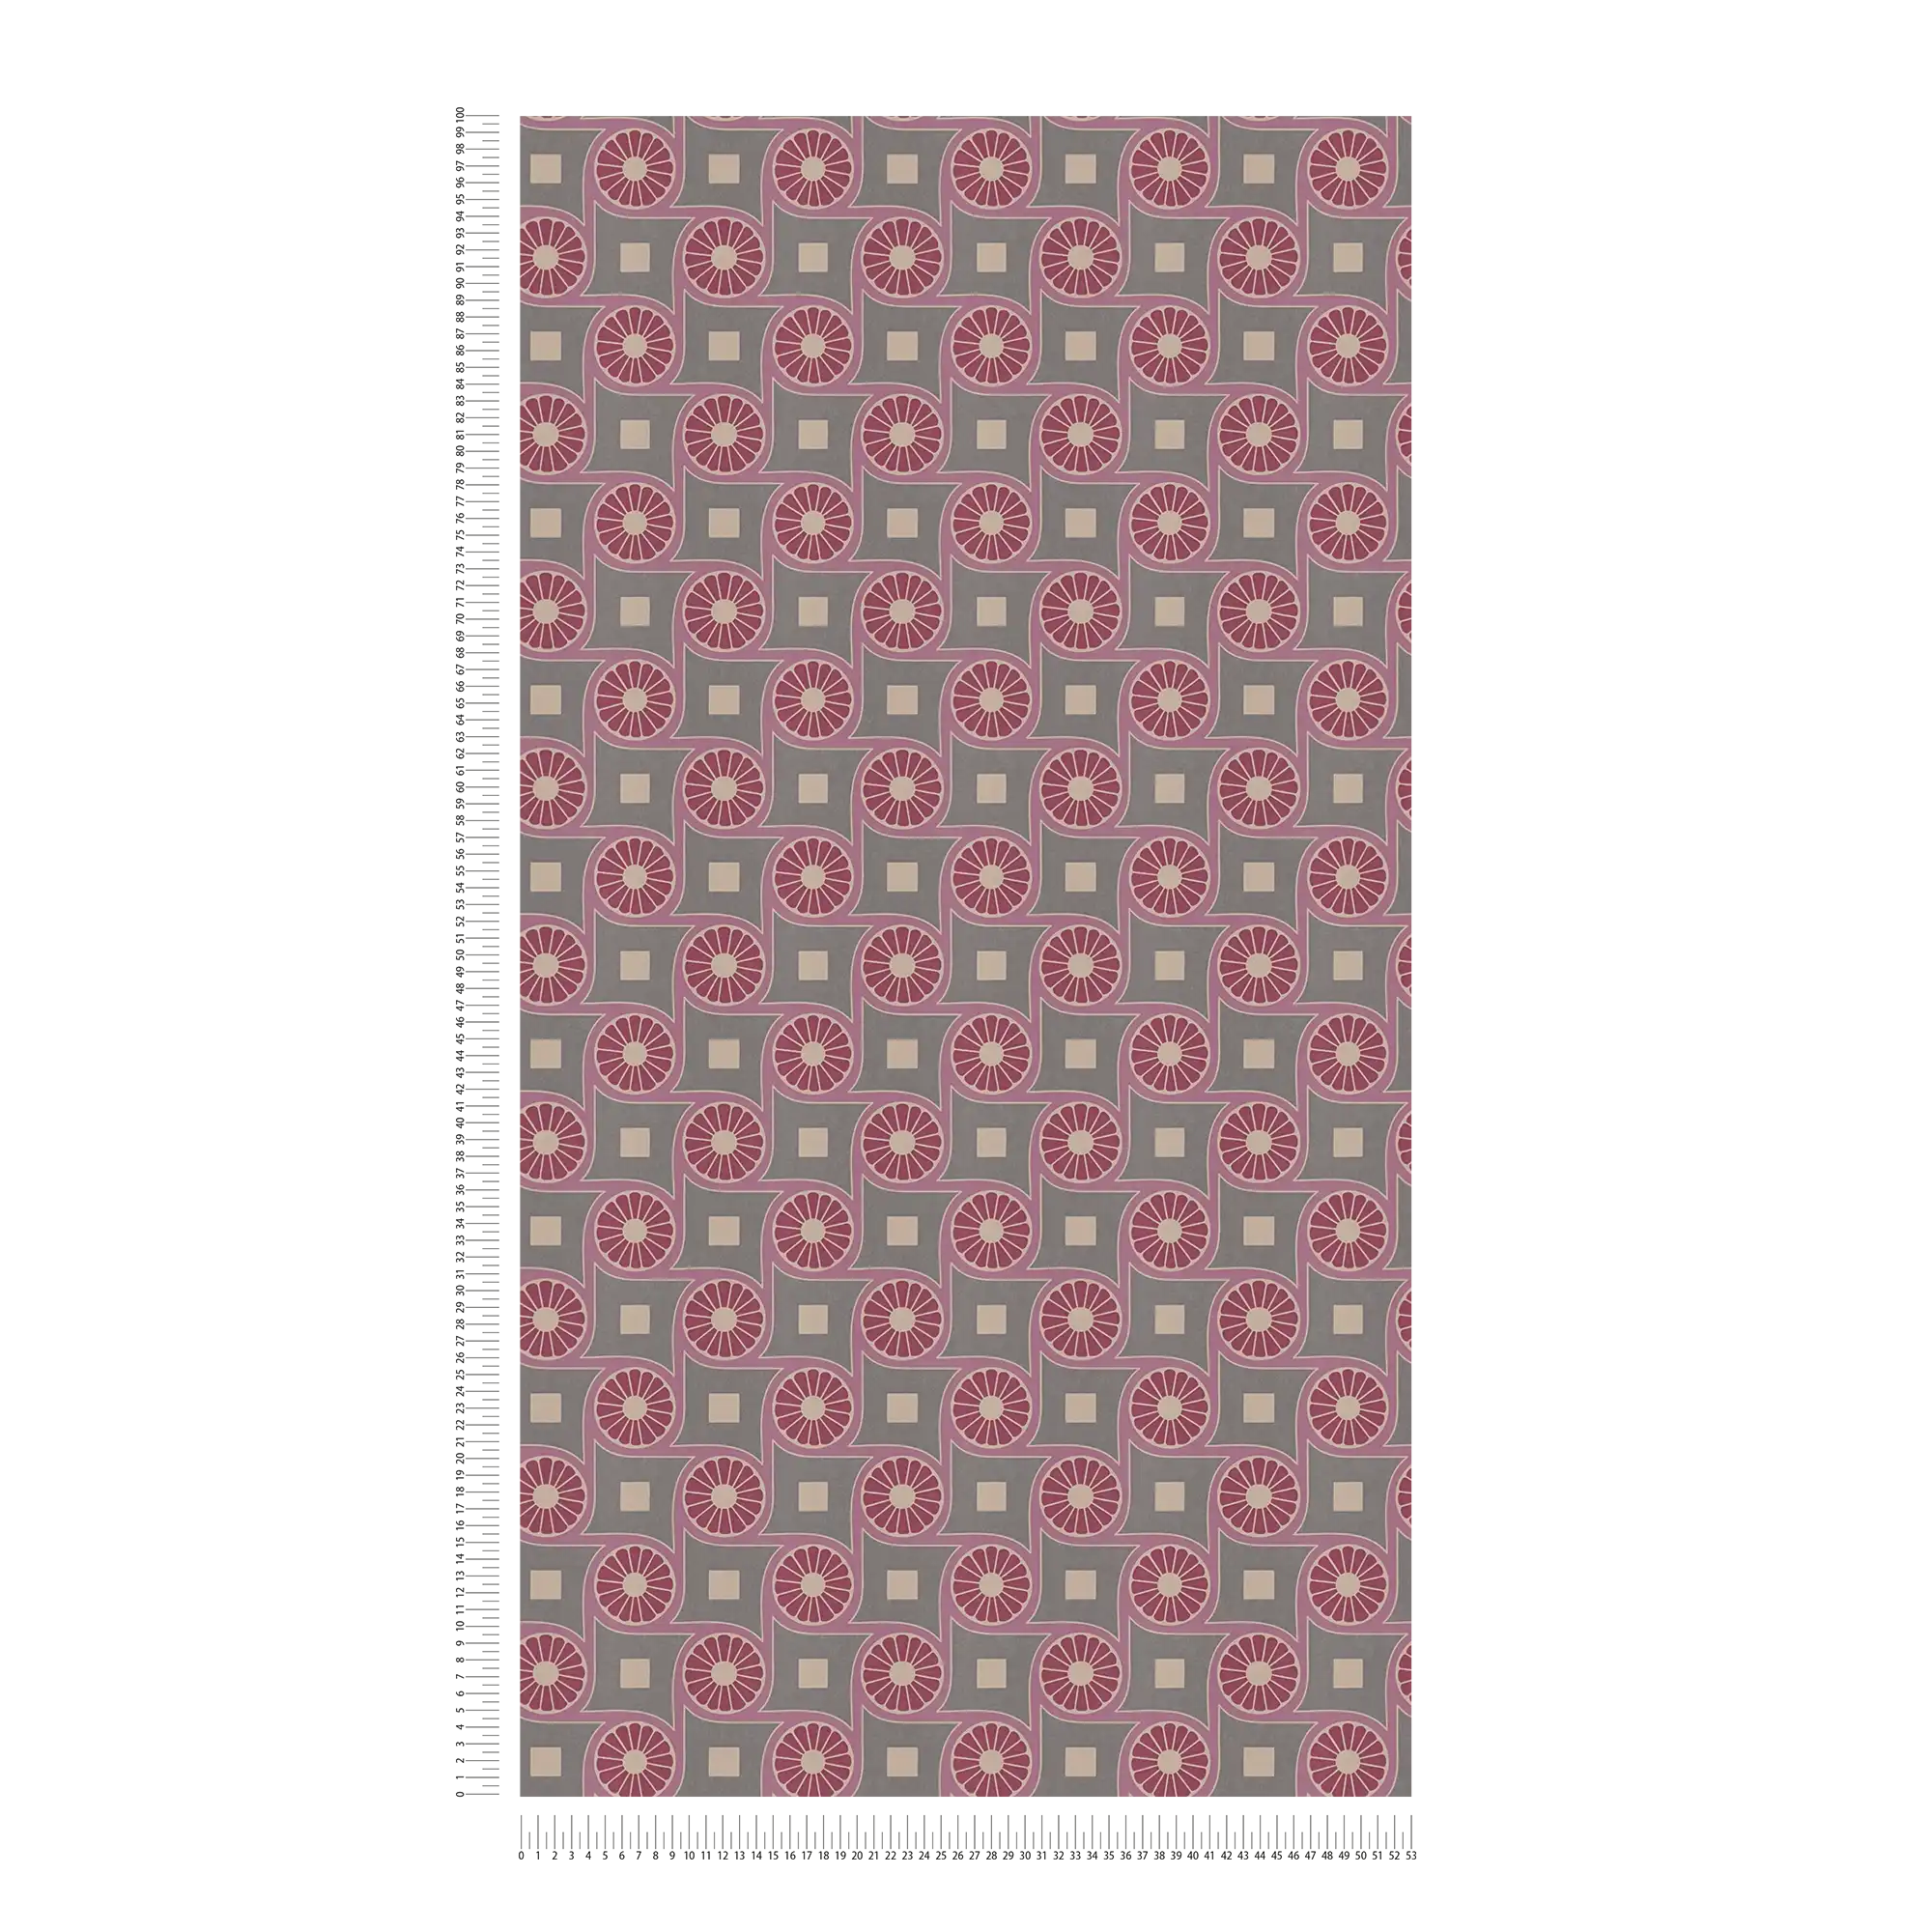             Retro non-woven wallpaper with circle pattern and squares - purple, red, beige
        